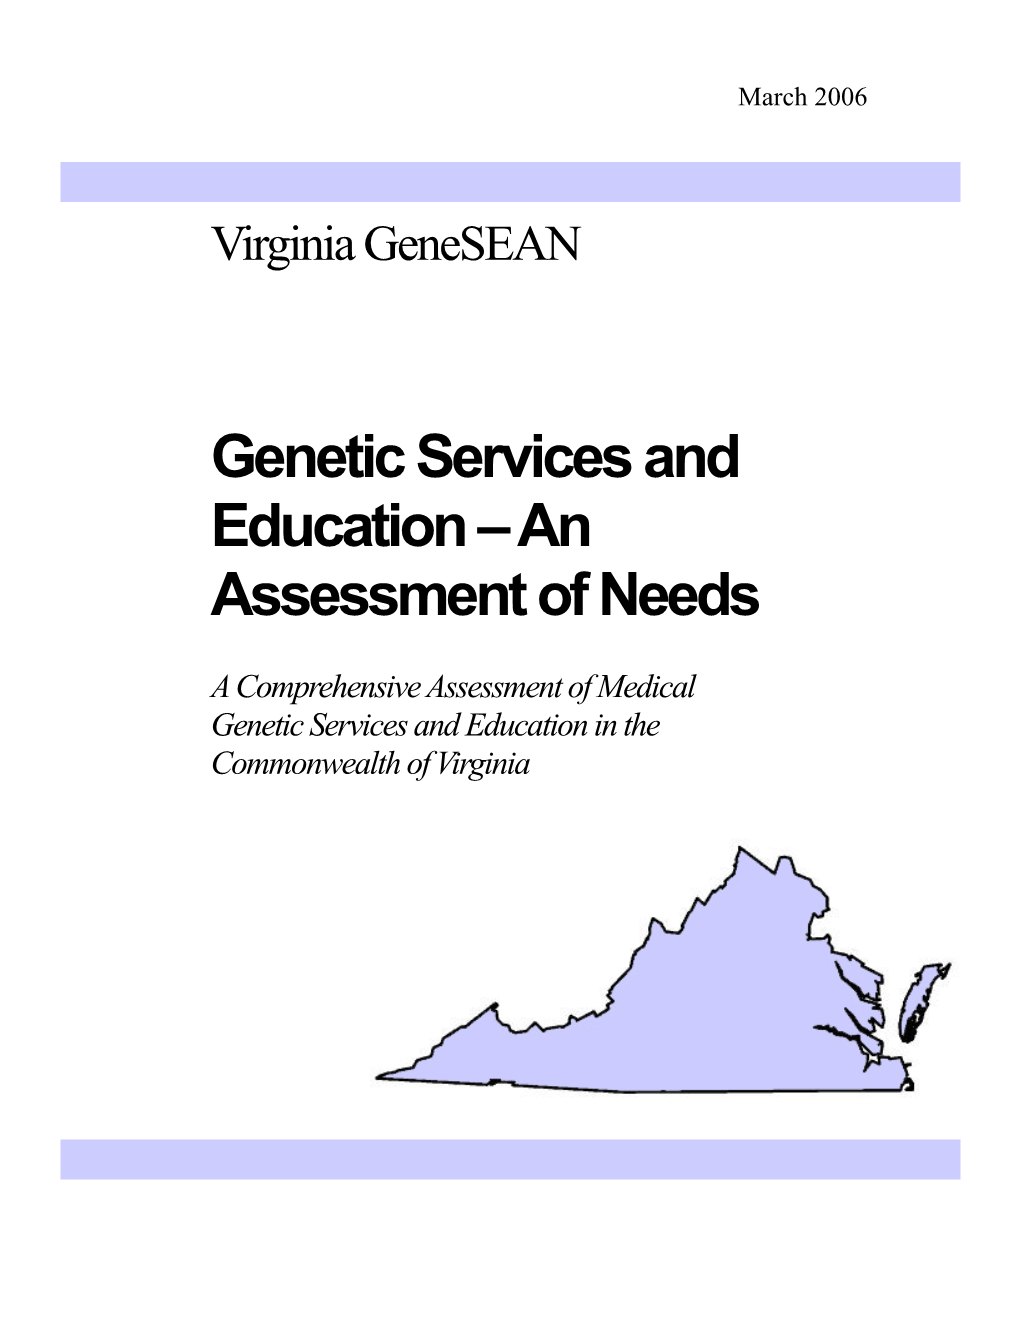 Genetic Services and Education – an Assessment of Needs